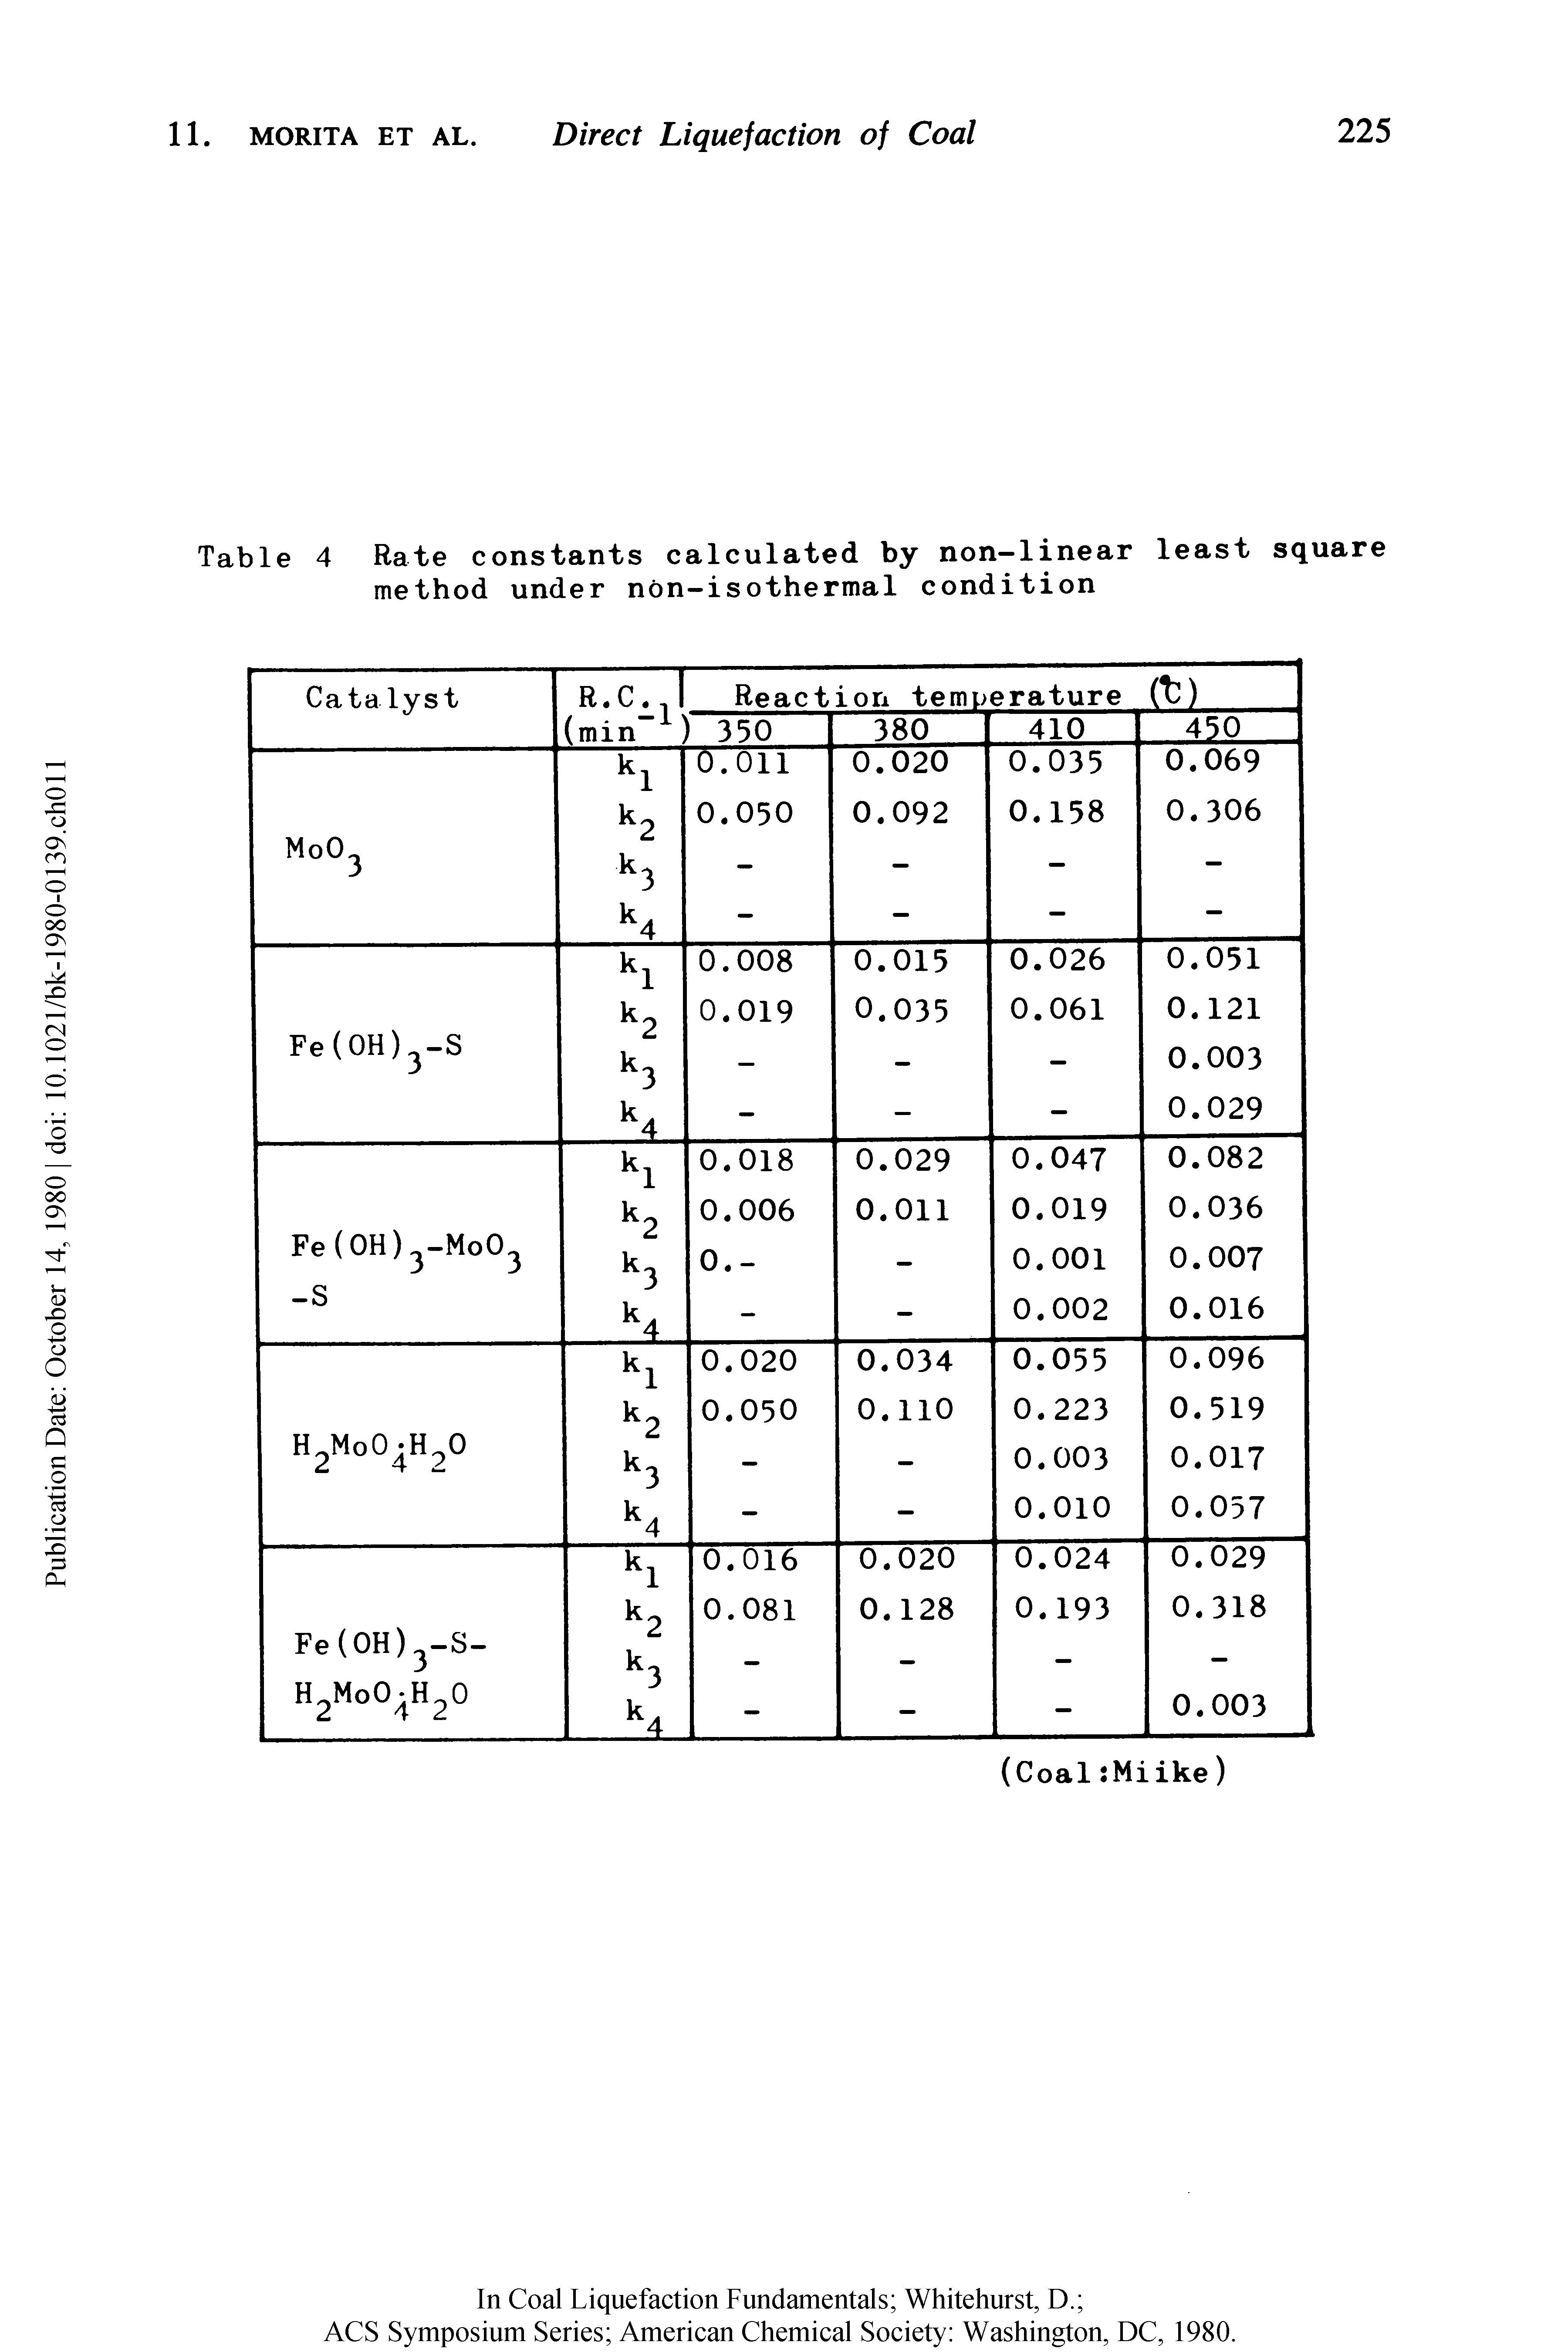 Table 4 Rate constants calculated by non-linear least square method under non-isothermal condition...